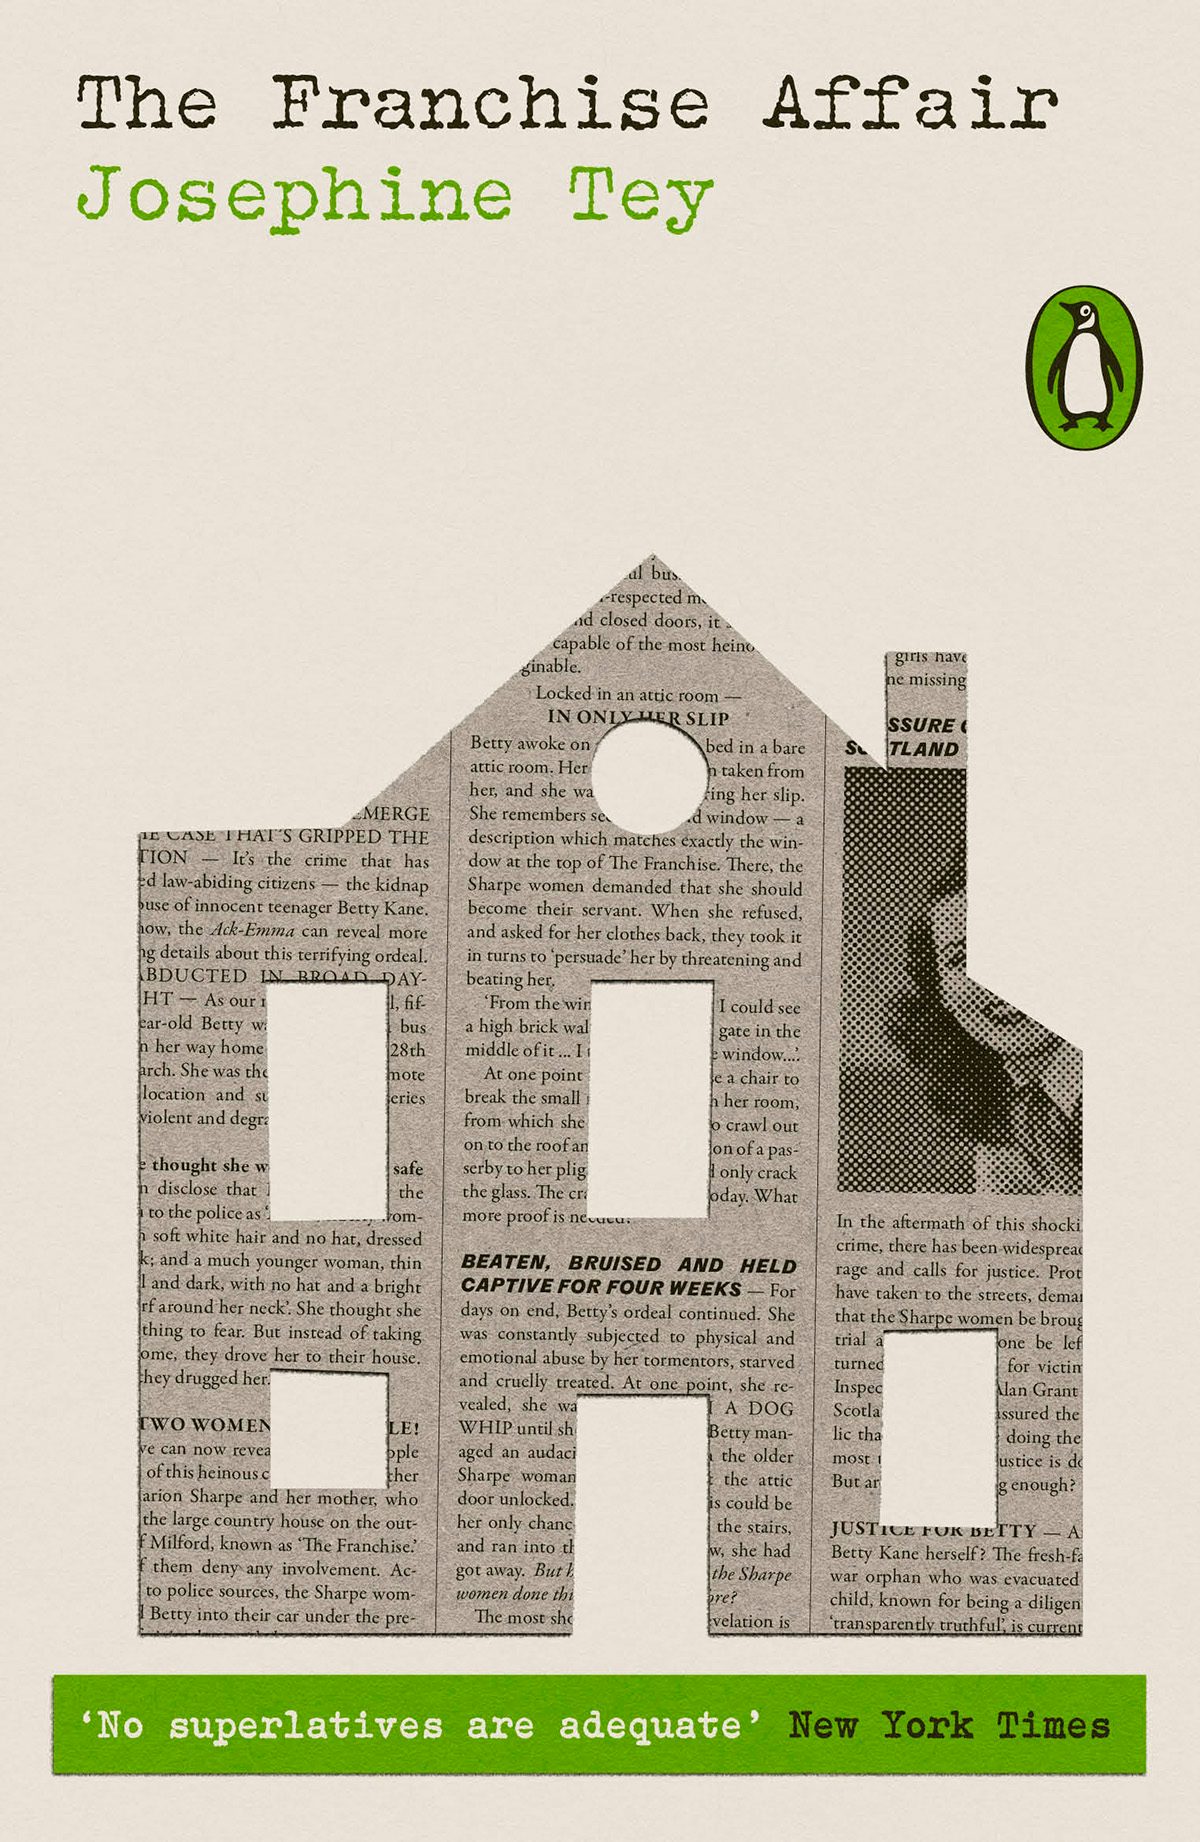 Image shows the cover of The Franchise Affair from Penguin Modern Classics Crime and Espionage series, showing a building cut out of newspaper